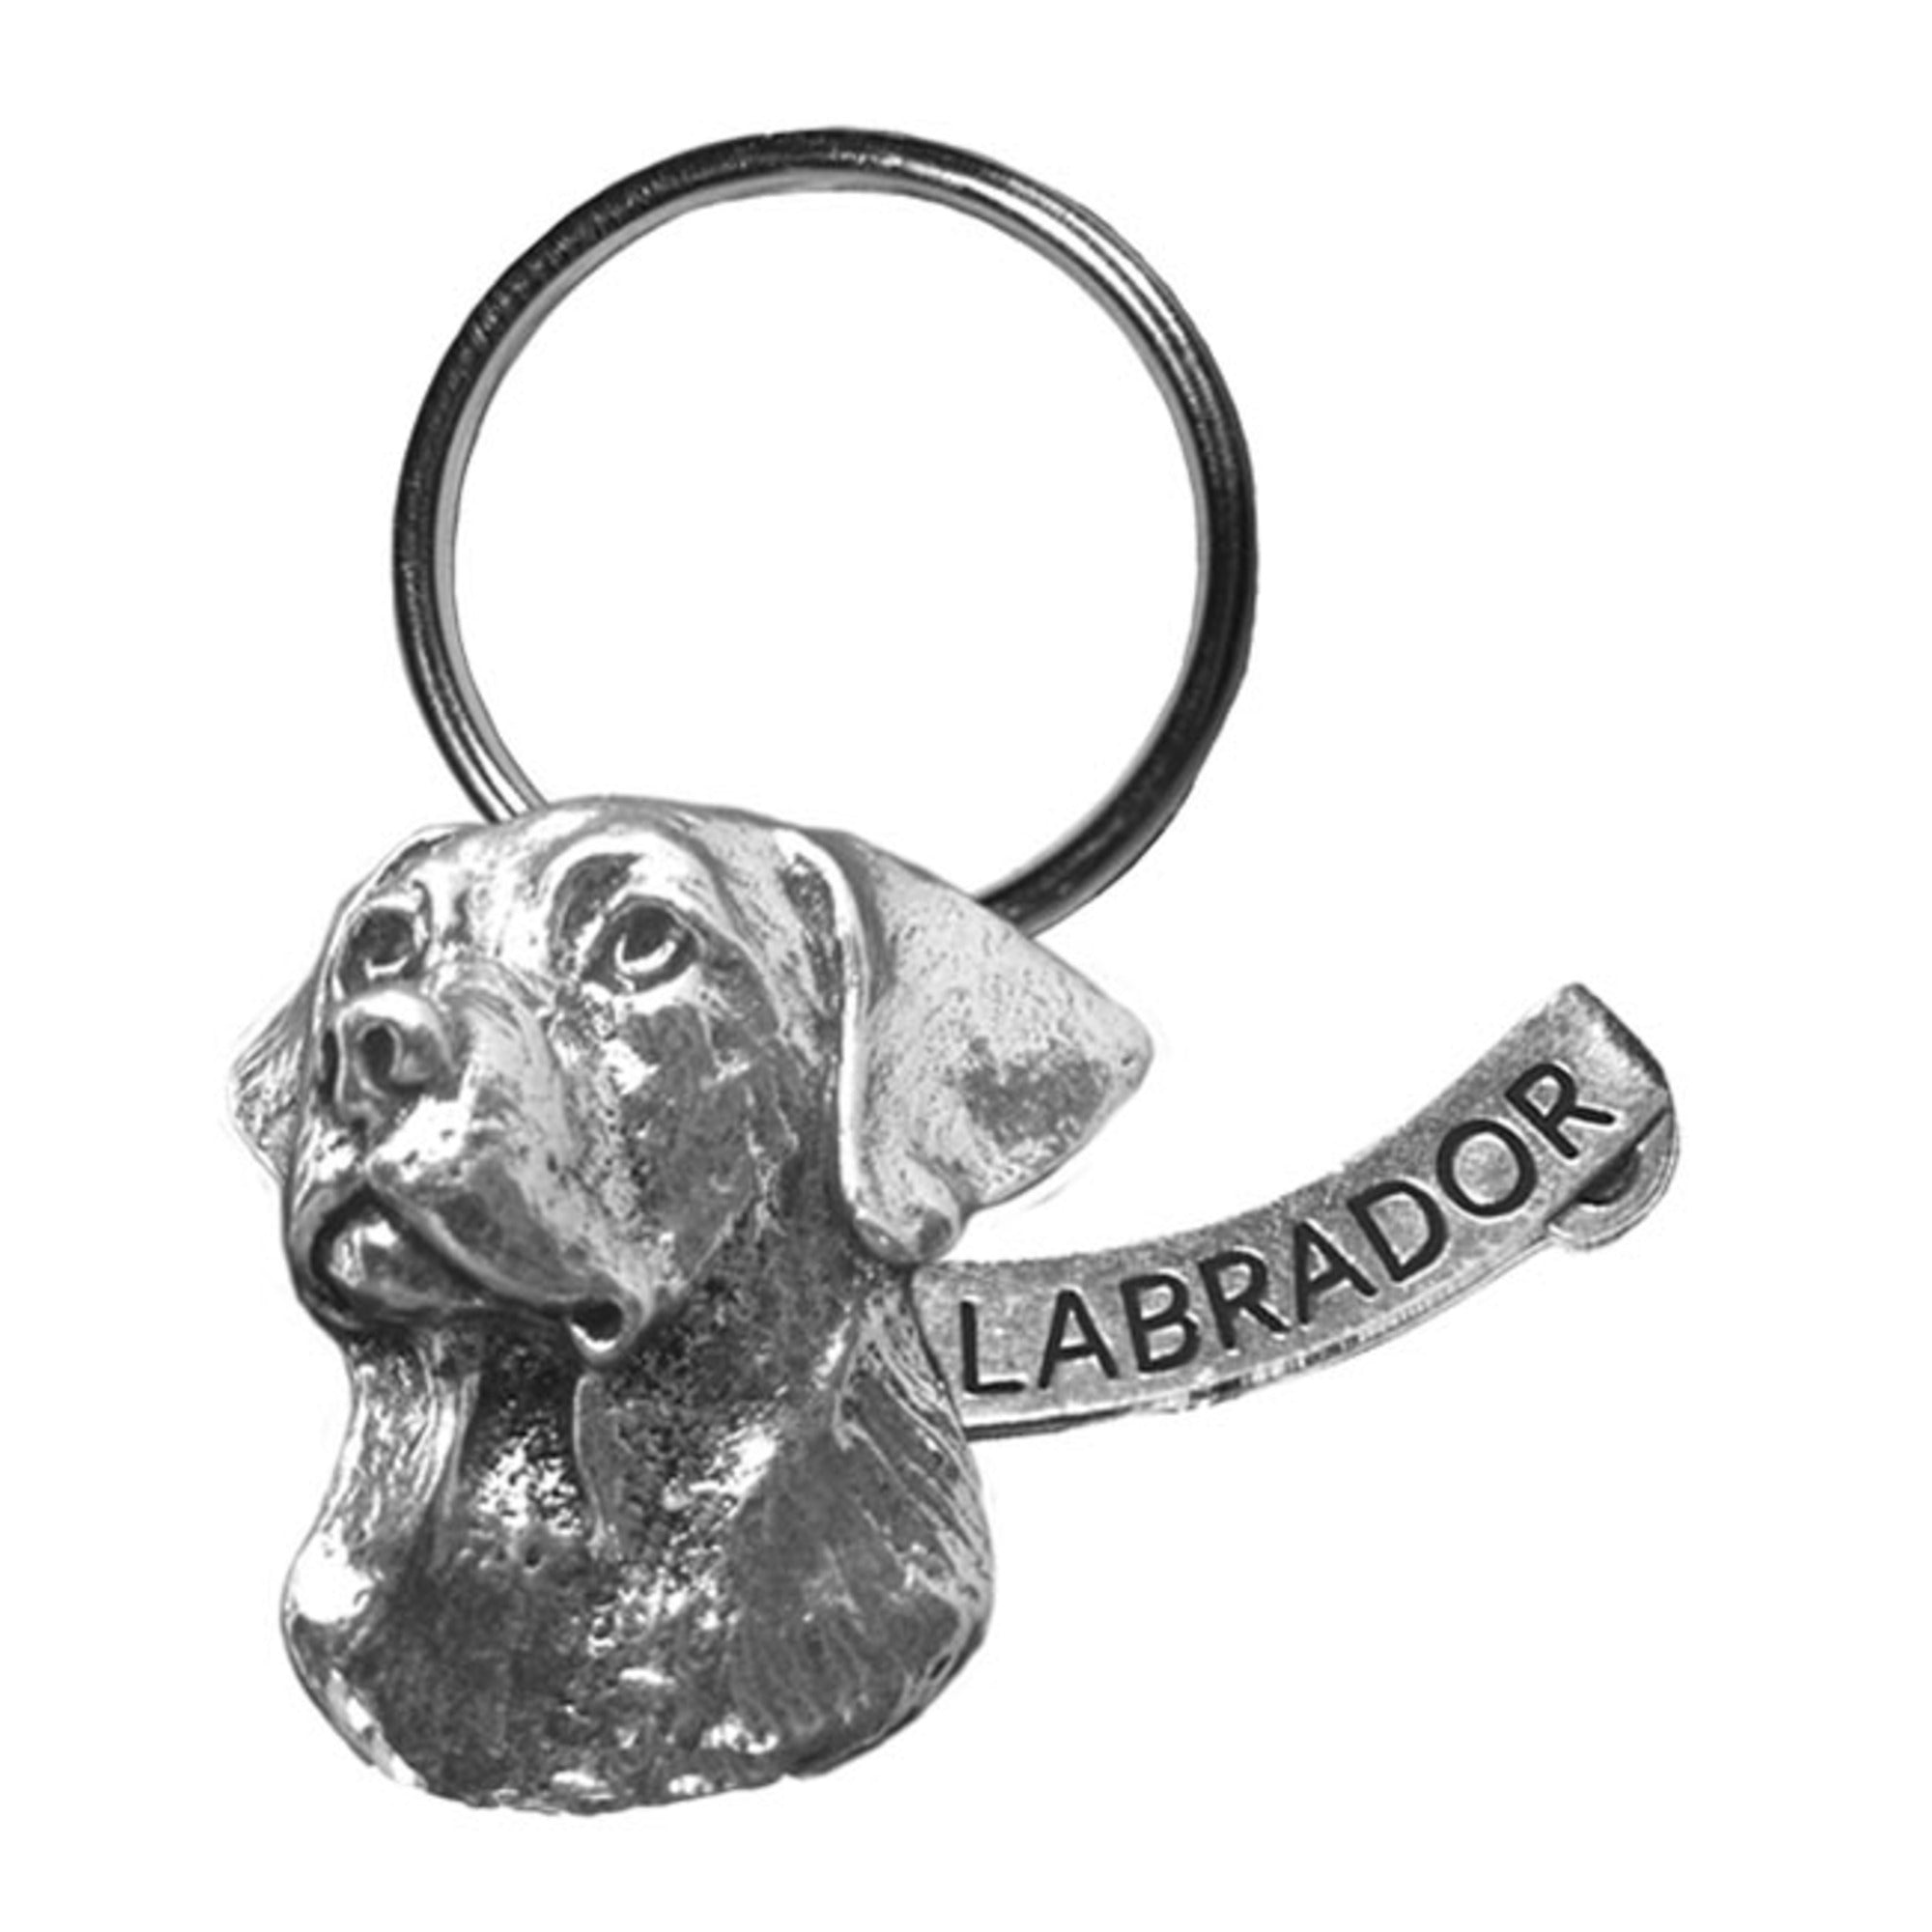 New-Spin Metal Casting Labrador Keychain